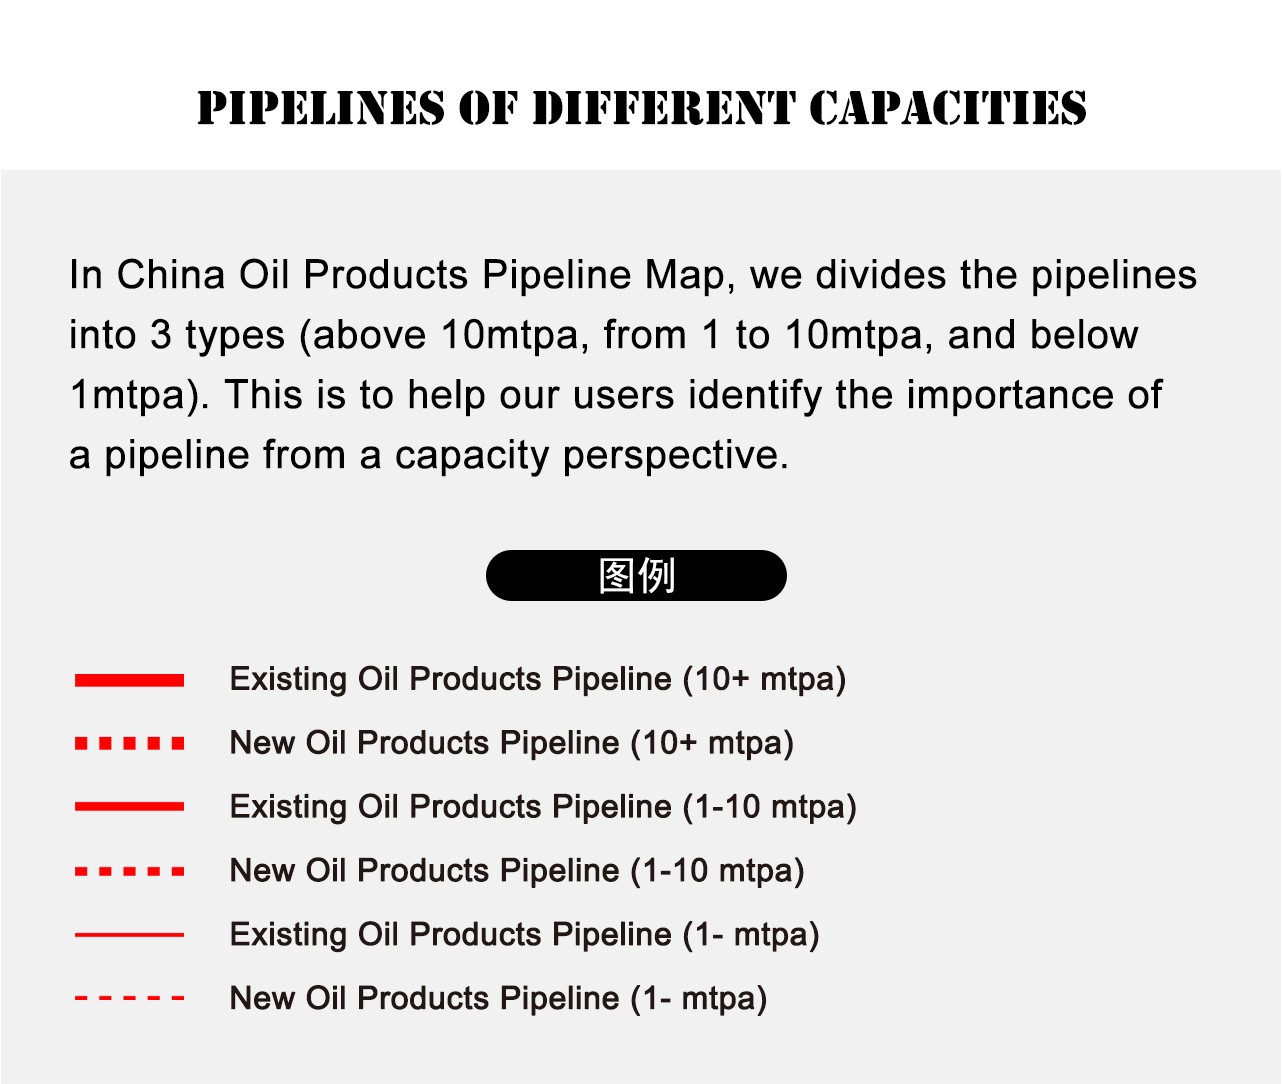 Pipelines of Different Capacities